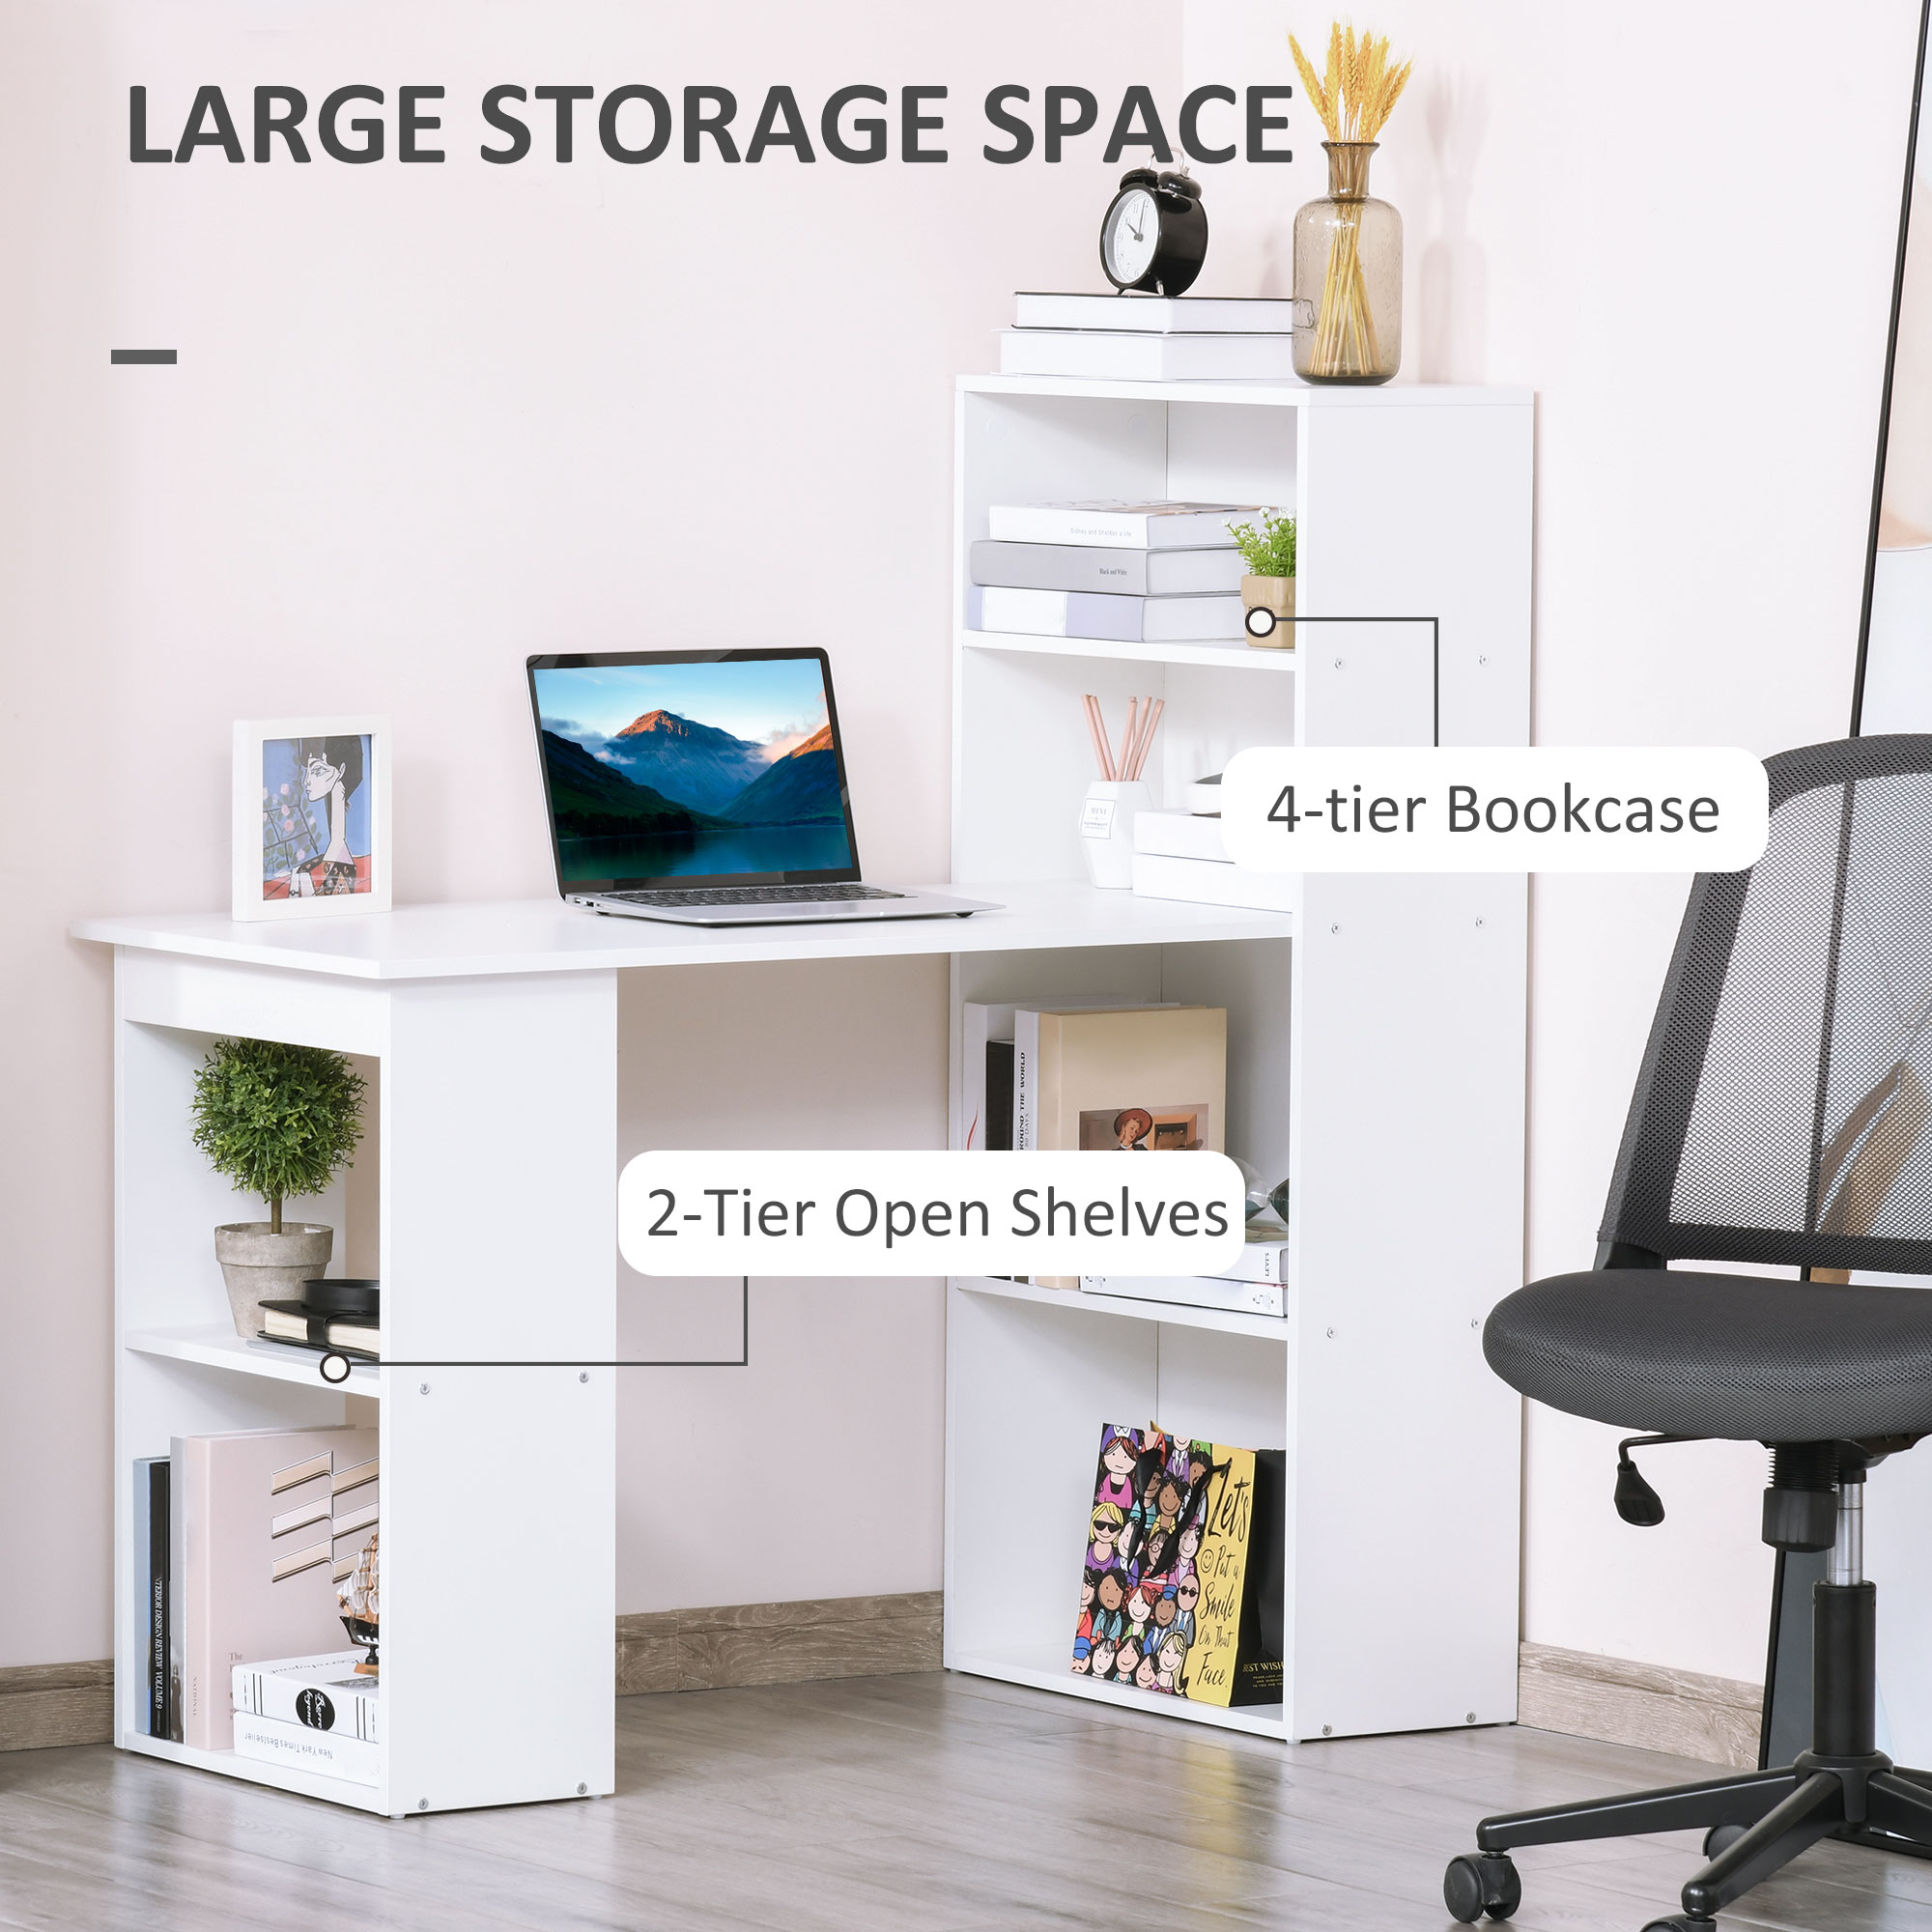 HOMCOM Modern Home Office Desk with 6-Tier Storage Shelves, 47" Writing Table with Bookshelf, White - image 4 of 9